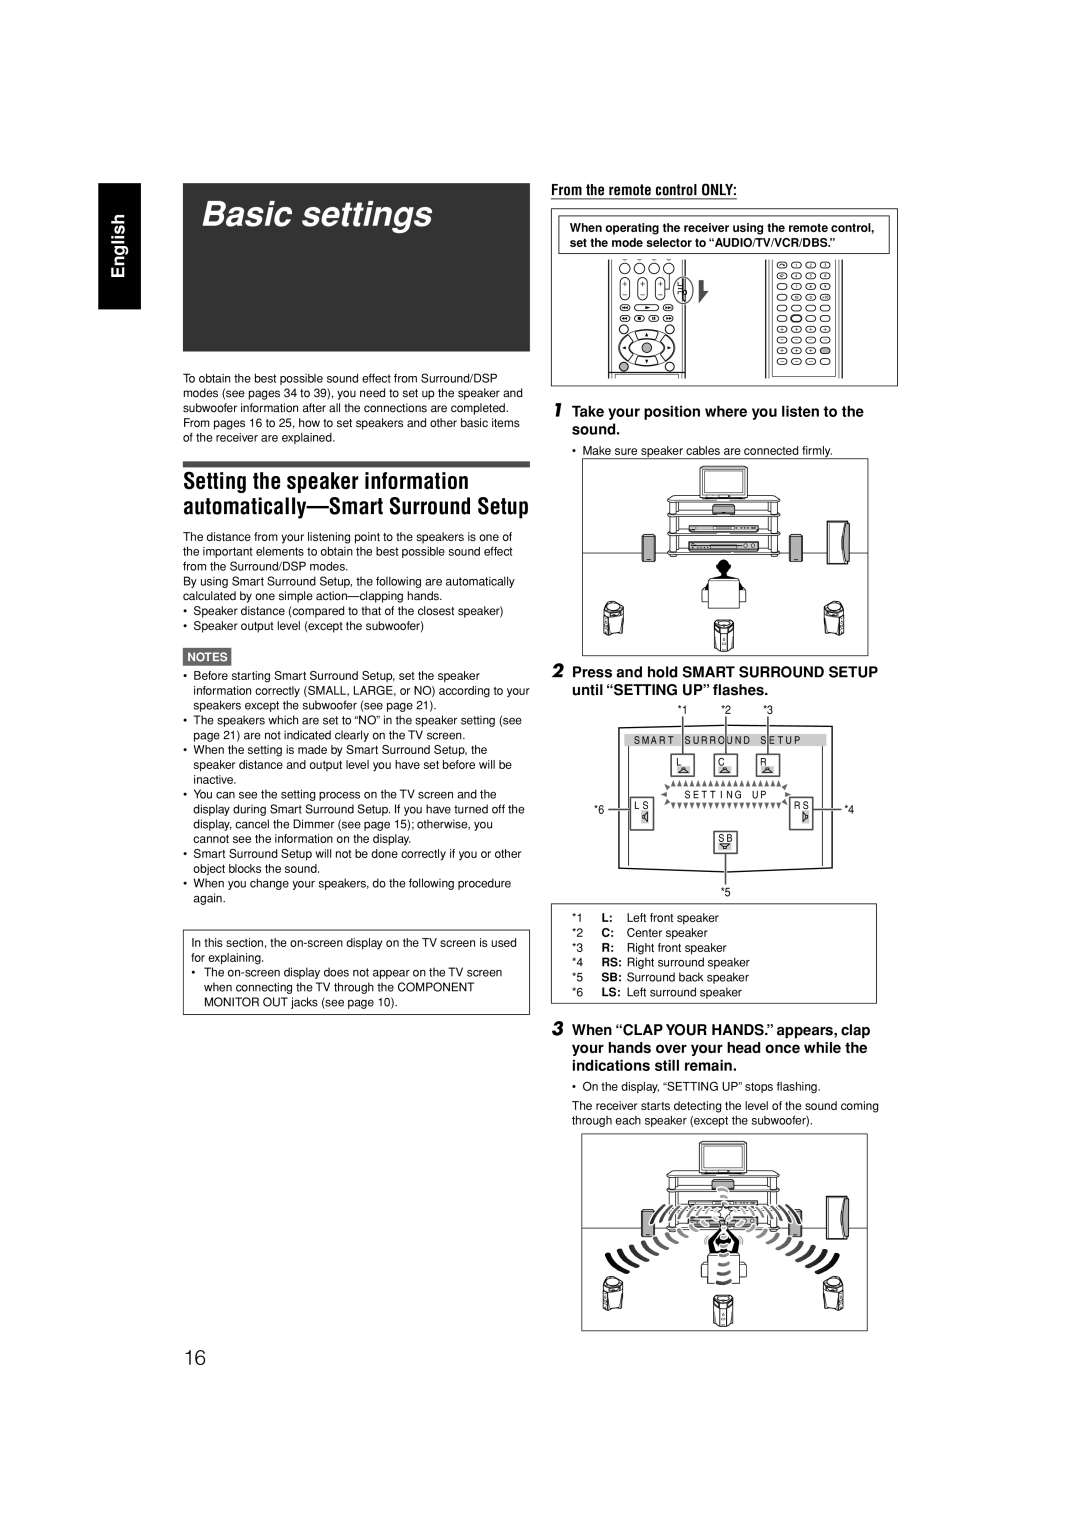 JVC RX-F31S manual Basic settings, English, From the remote control ONLY, 1Take your position where you listen to the sound 